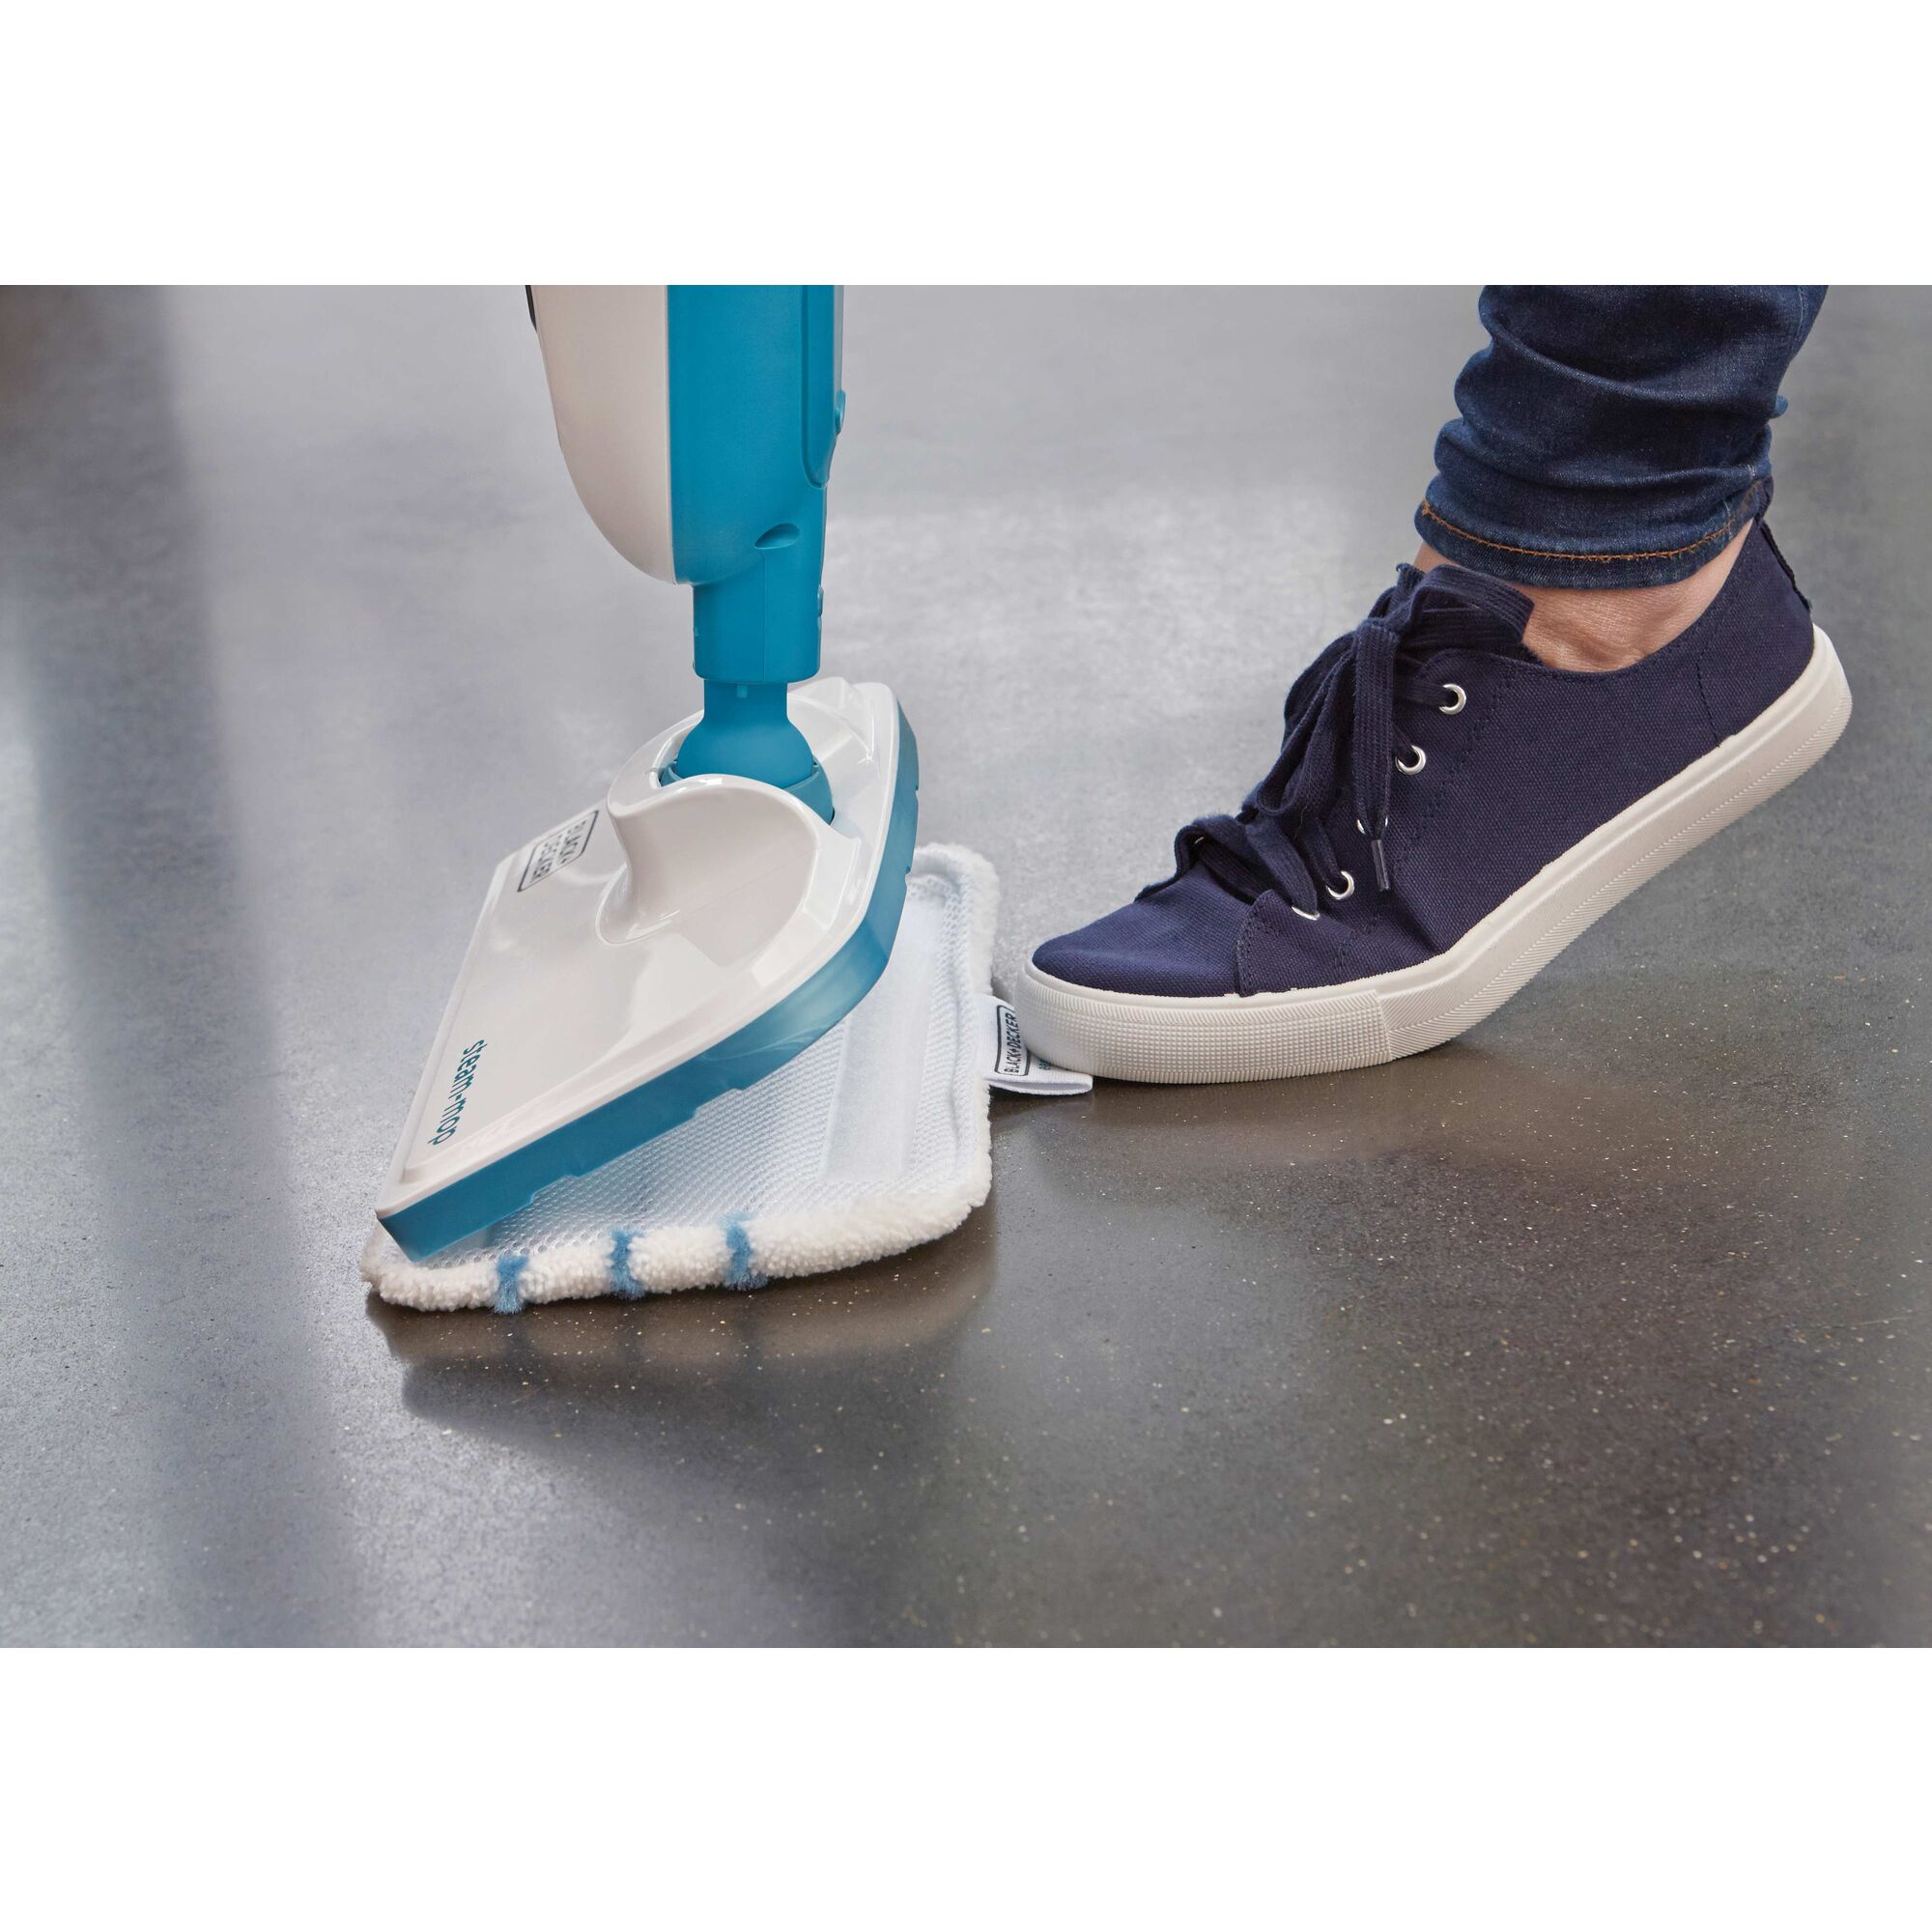 Ready to use in 30 seconds feature of Classic Steam Mop.